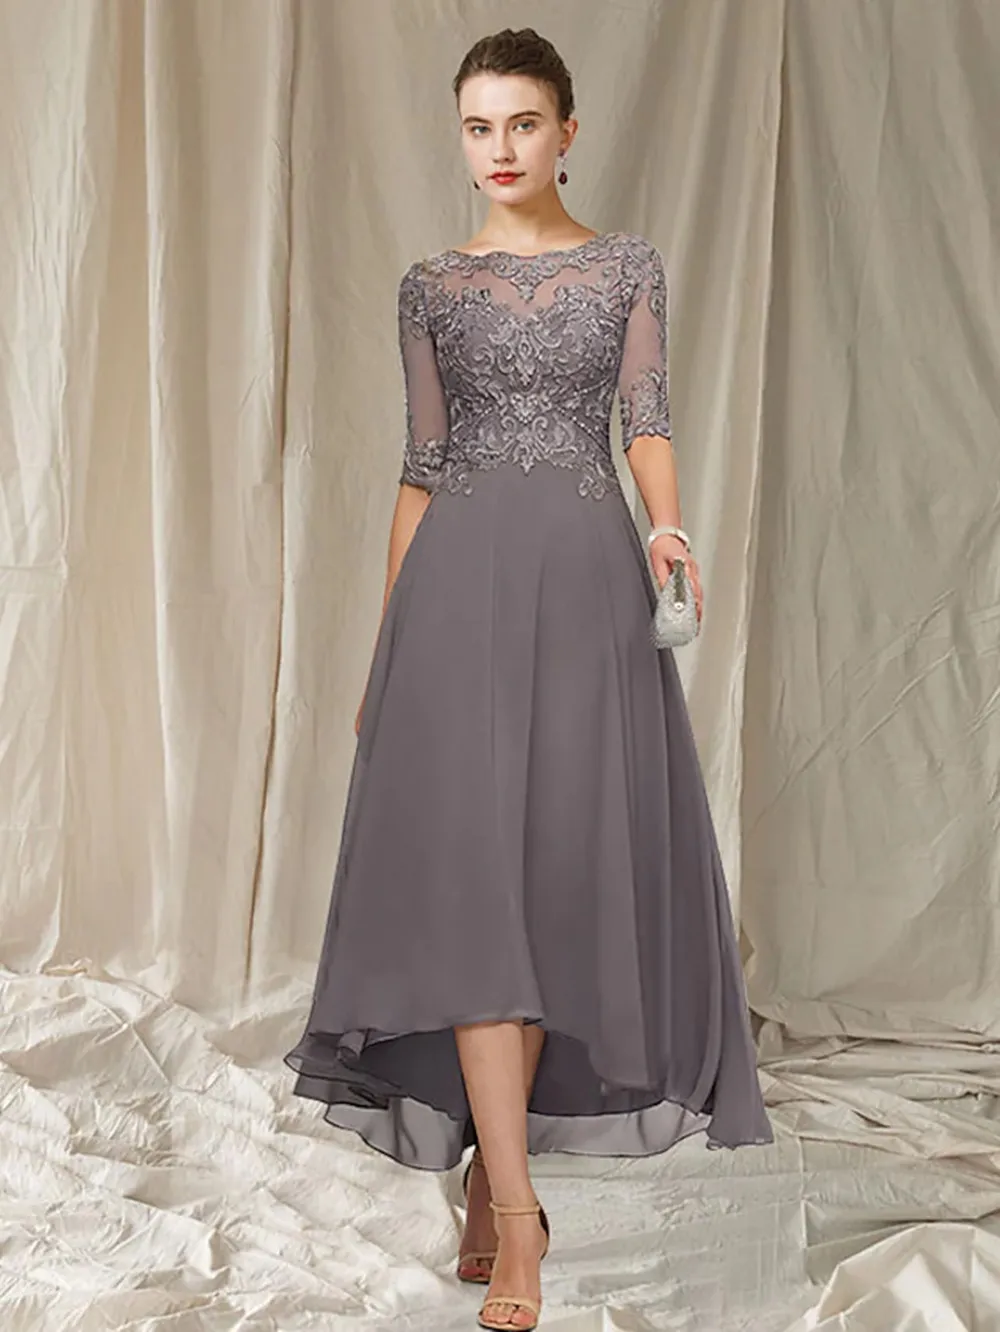 

Elegant A-Line Mother of the Bride Dress Jewel Neck Asymmetrical Ankle Length Chiffon Lace Half Sleeve with Pleats Appliques